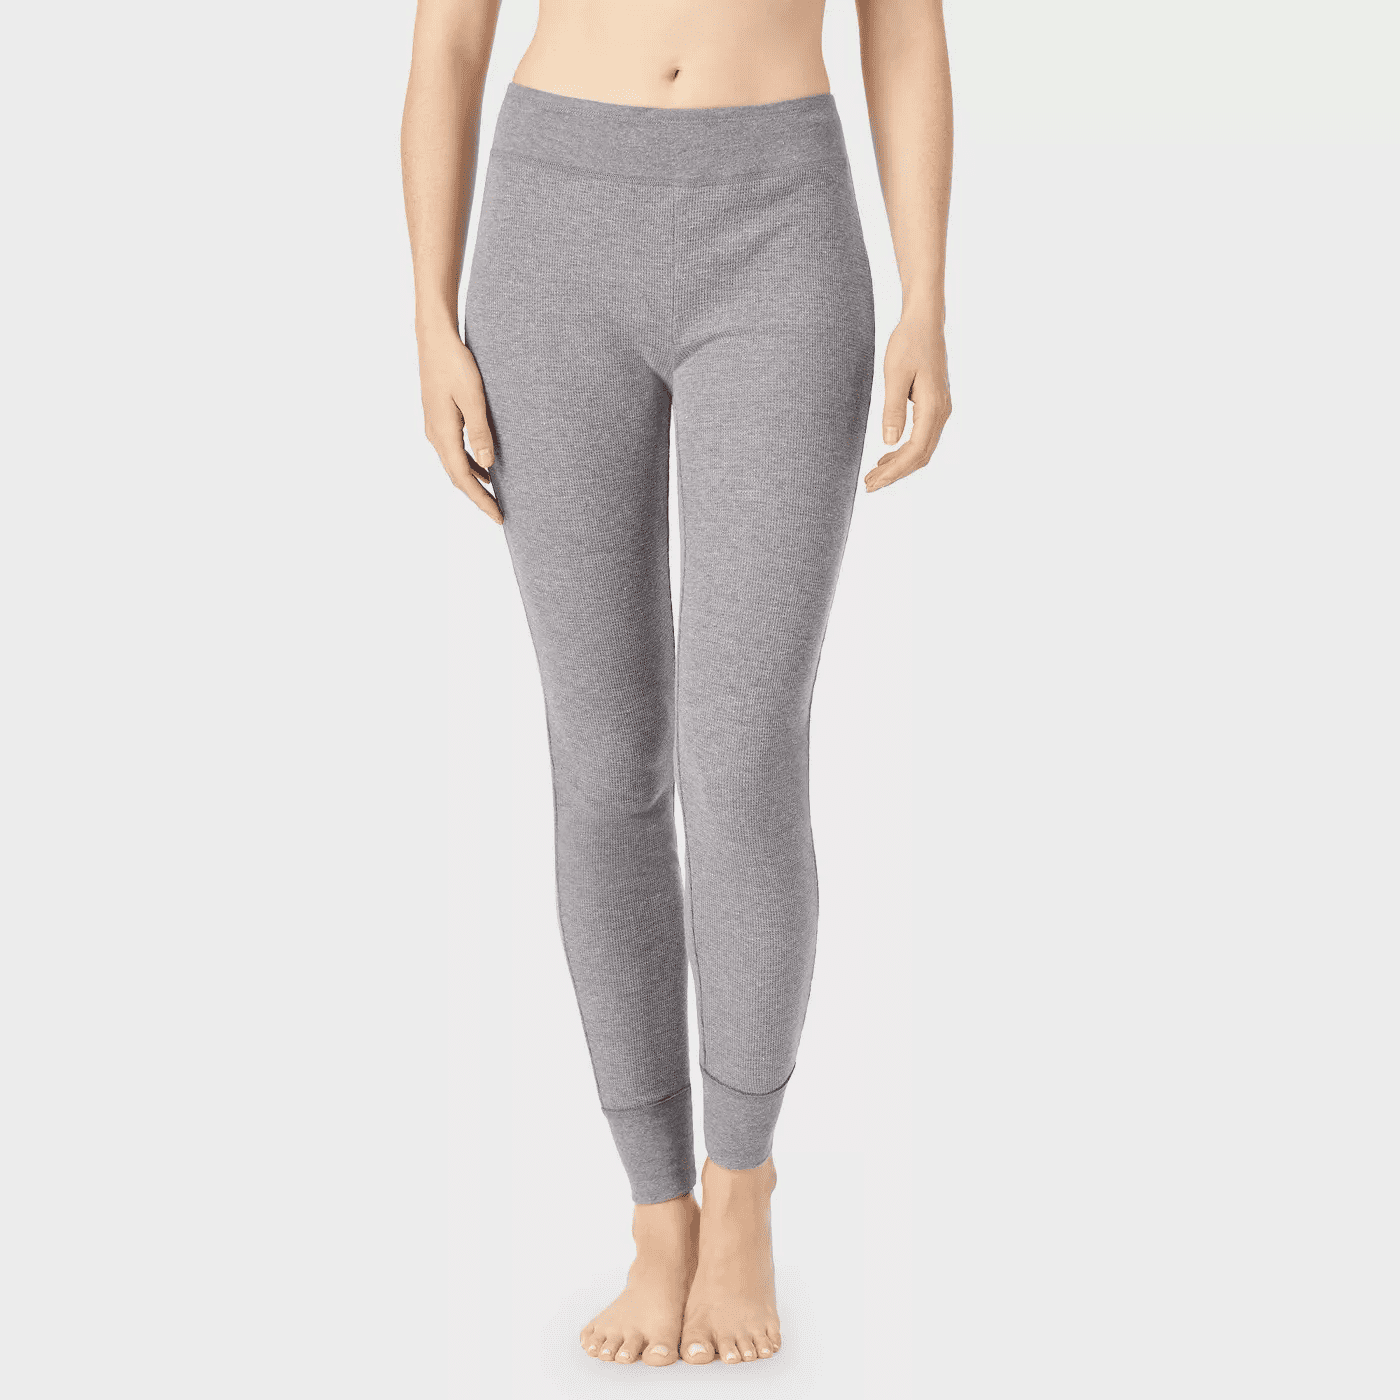 Warm Essentials by Cuddl Duds Women's WAFFLE WEAVE THERMAL LEGGINGS/PANTS GRAY 